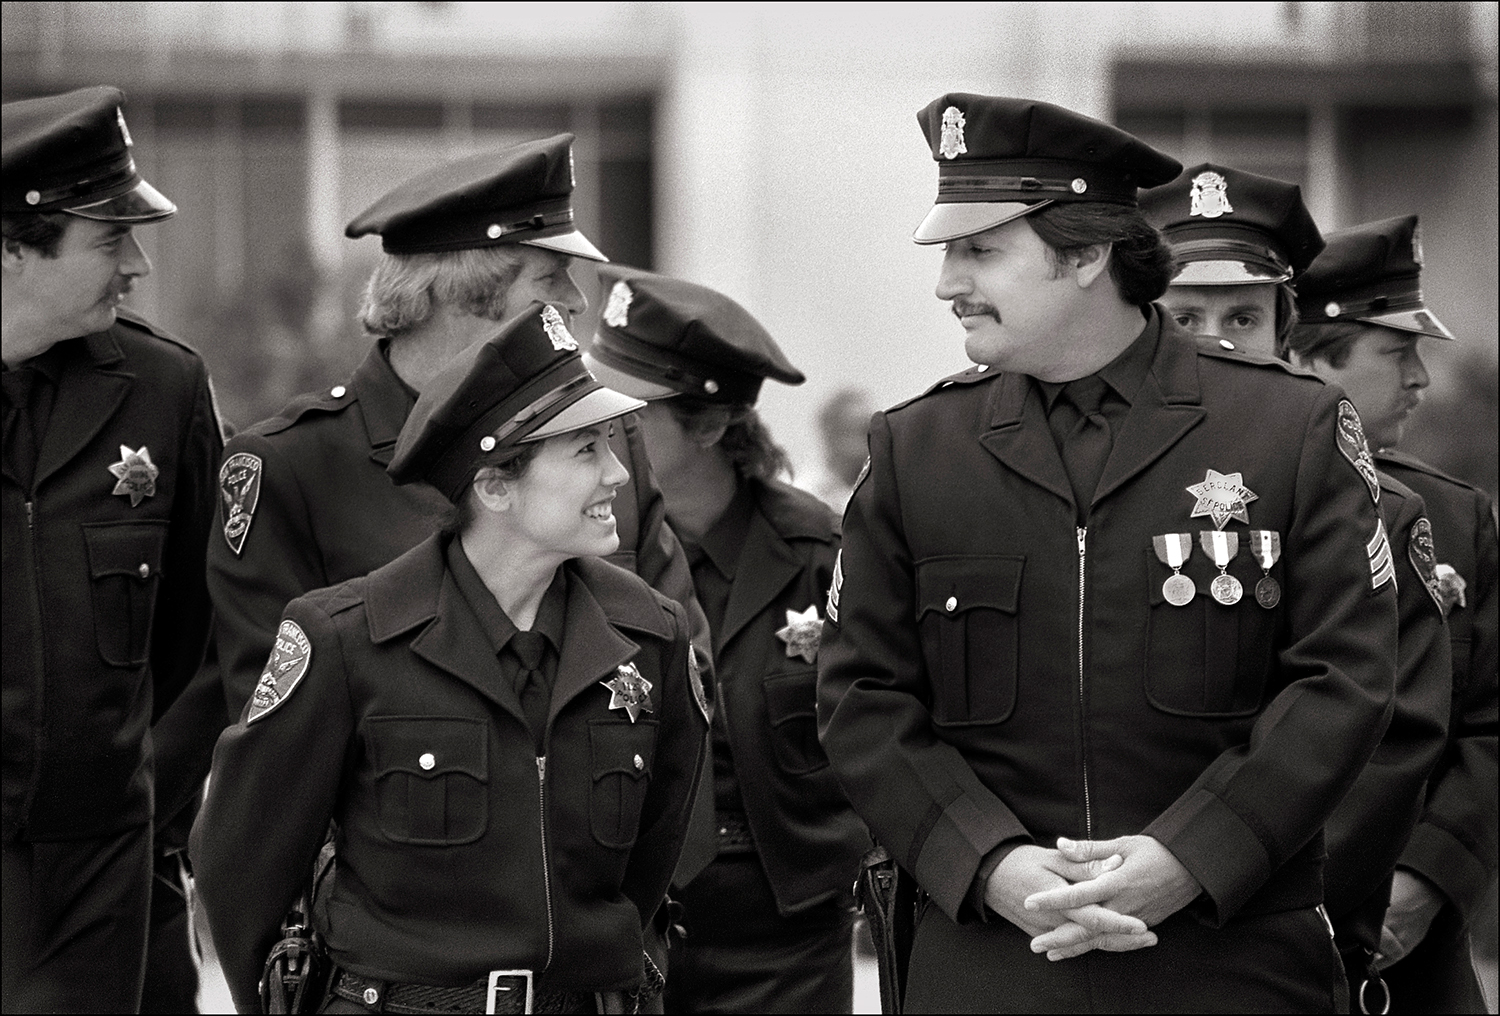 The Rookie, San Francisco, 1982